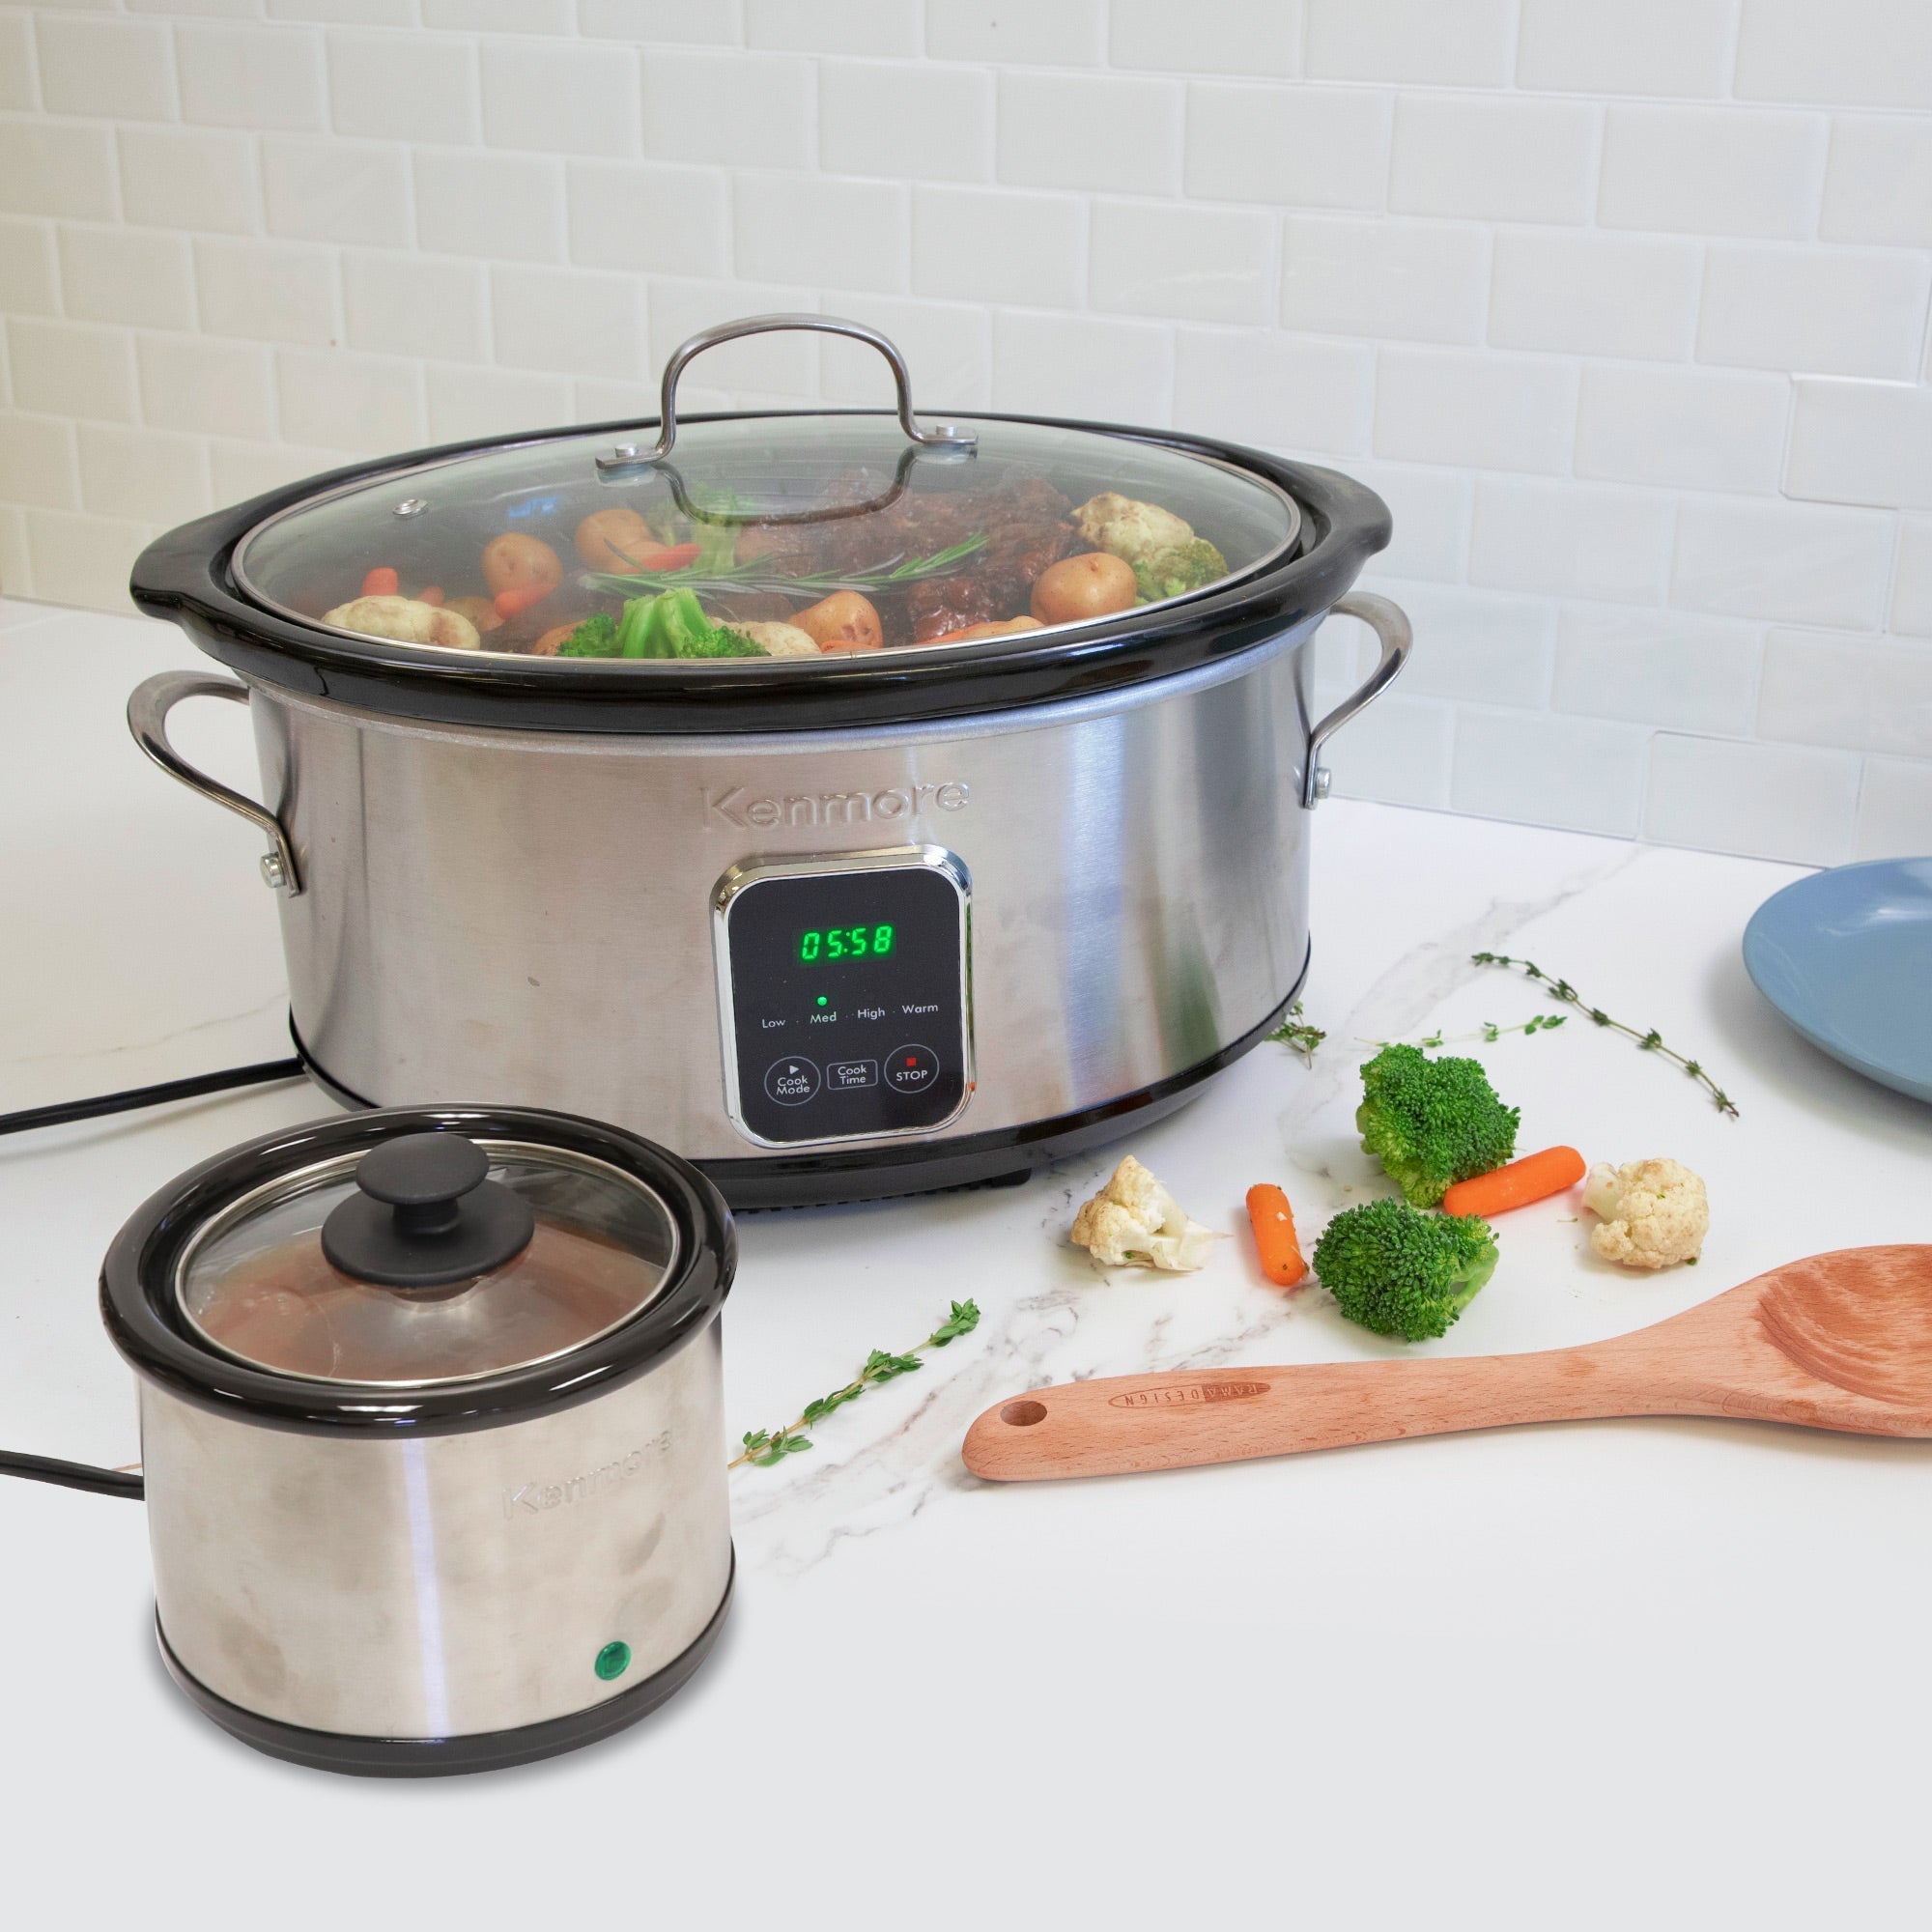 Lifestyle image of Kenmore 7 qt programmable slow cooker and sauce warmer on a white marbled countertop with white tile backsplash behind. The slow cooker contains a roast and vegetables and there are pieces of broccoli and carrots, fresh thyme sprigs, and a wooden spoon on the counter beside it